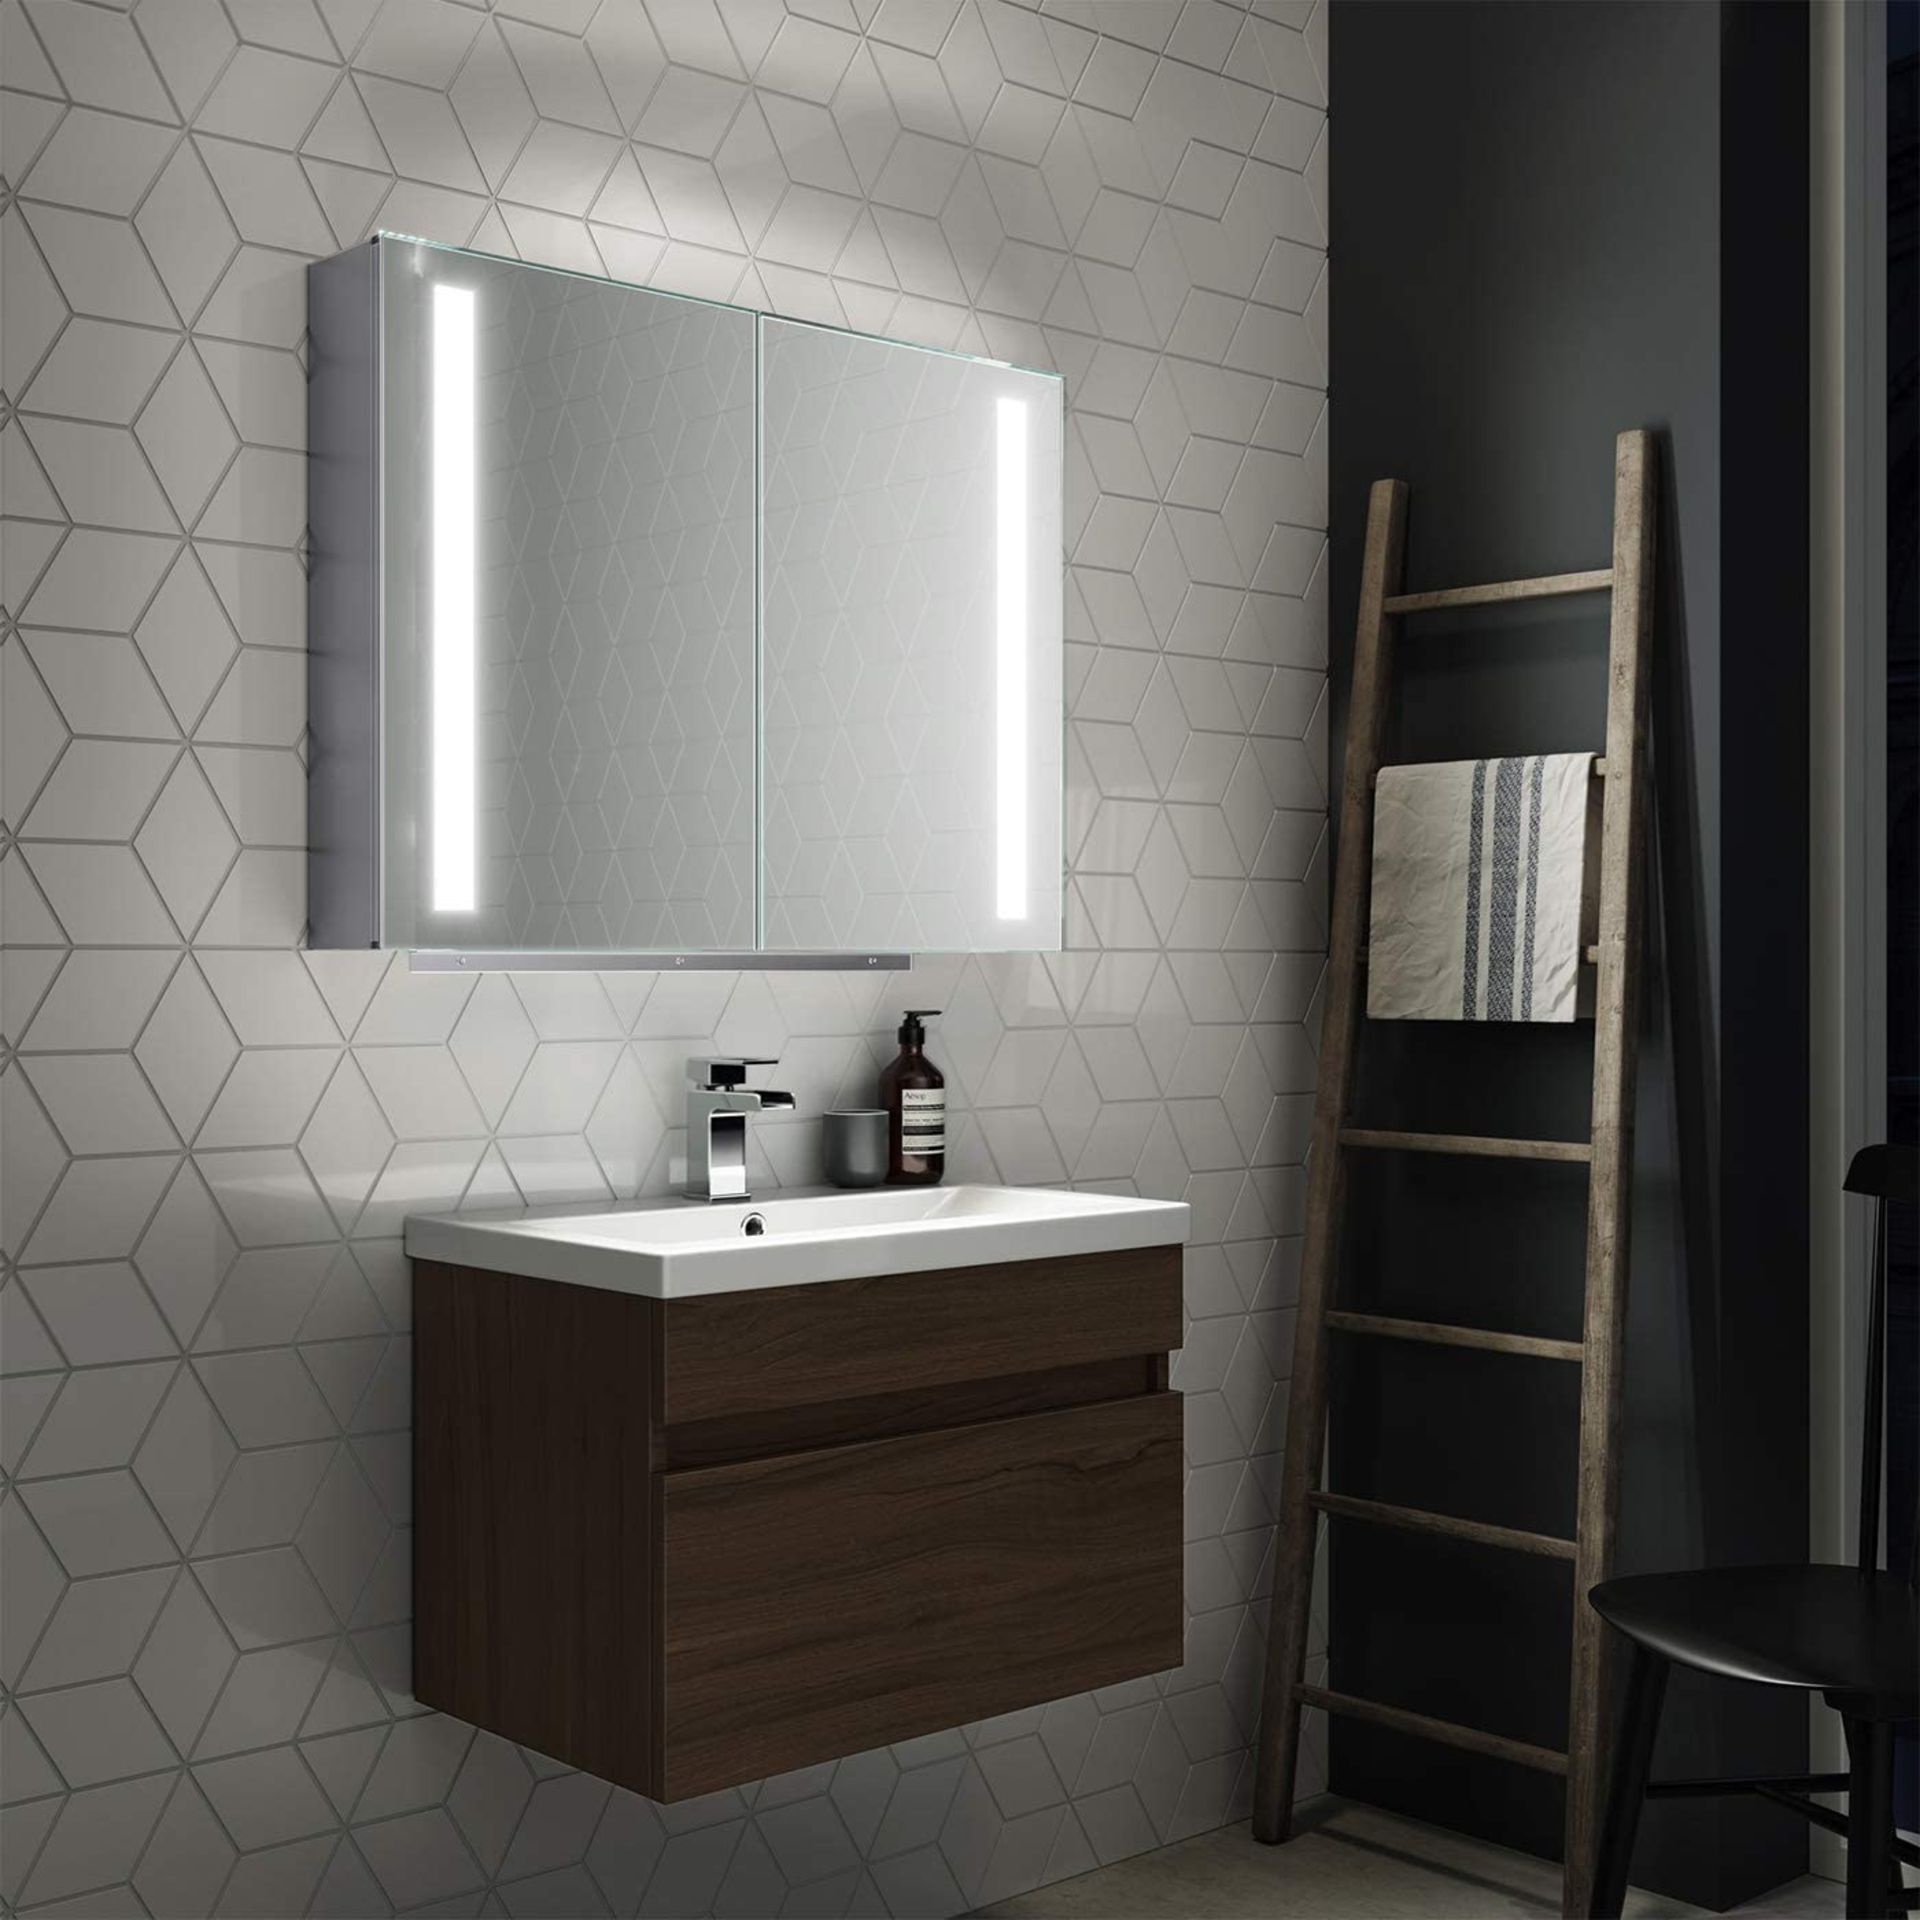 New 800x600 Dawn Illuminated Led Mirror Cabinet. RRP £939.99.Mc164. We Love This Mirror Cabine... - Image 2 of 3